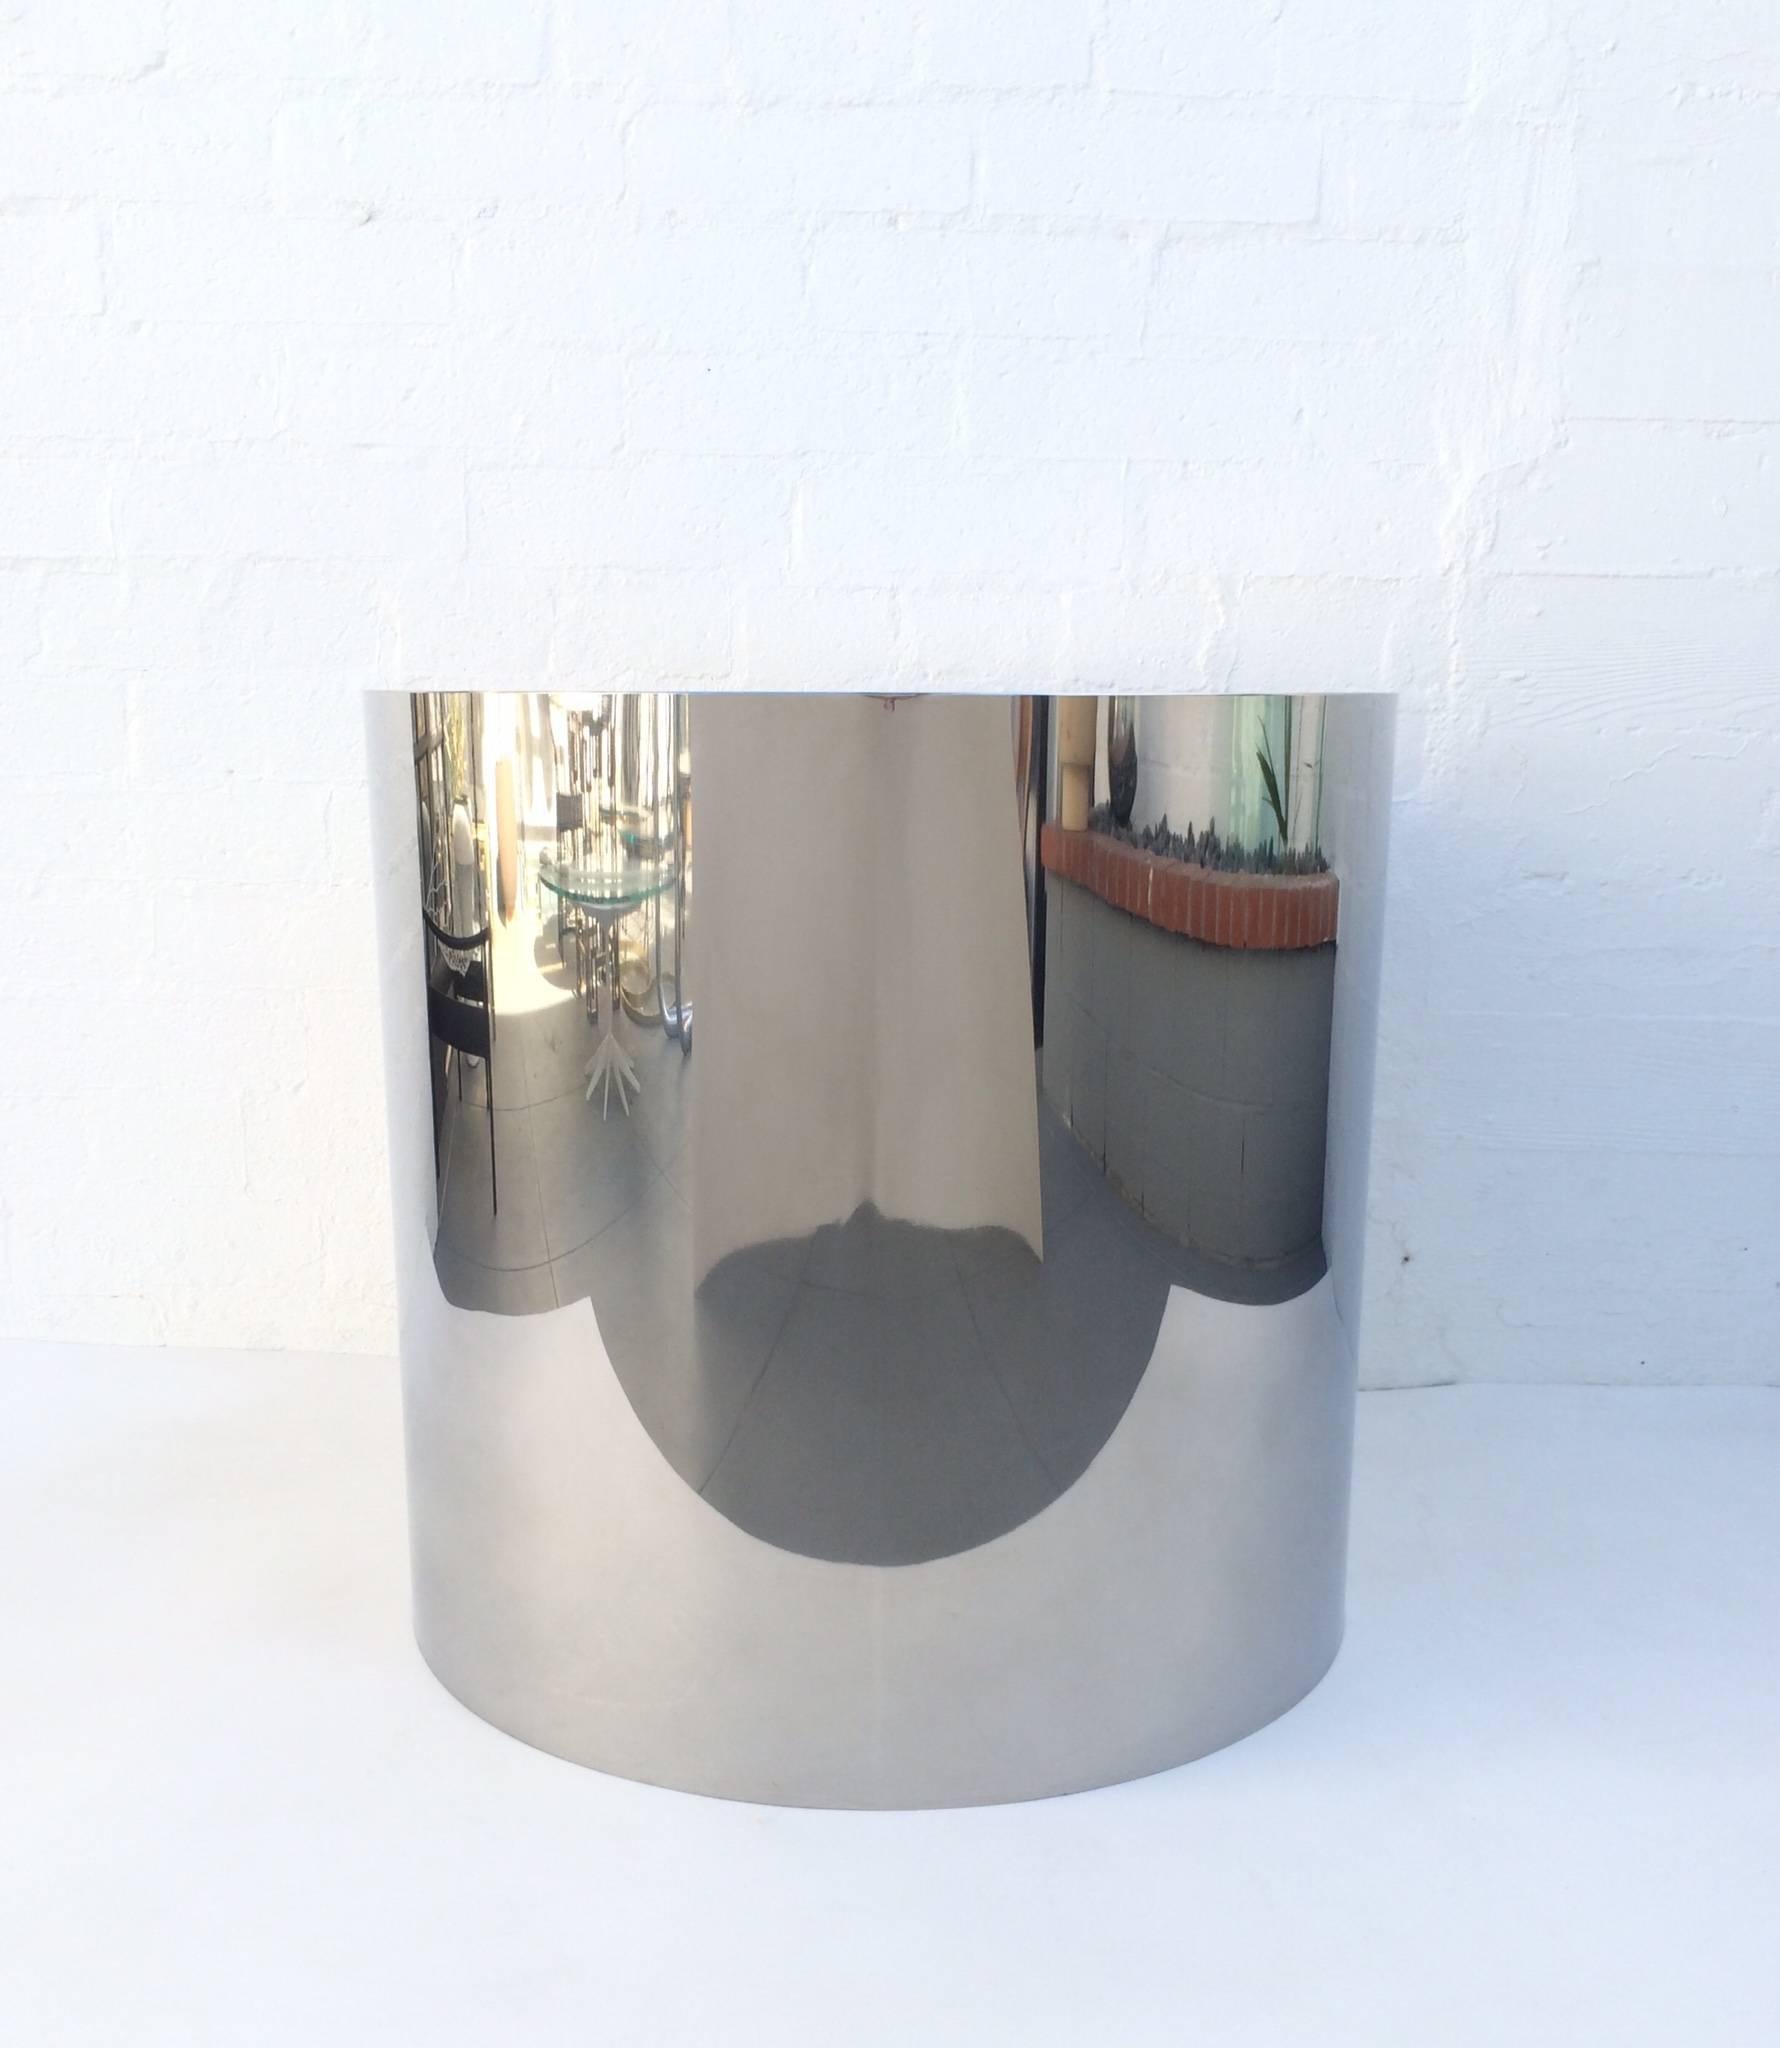 Stunning polished stainless steel table base by Pace Collection. 
This cylinder base is seamless, has wonderful eye appeal and will make a statement.
It's large-scale can support a big glass top. 
We are selling this without glass, but can order